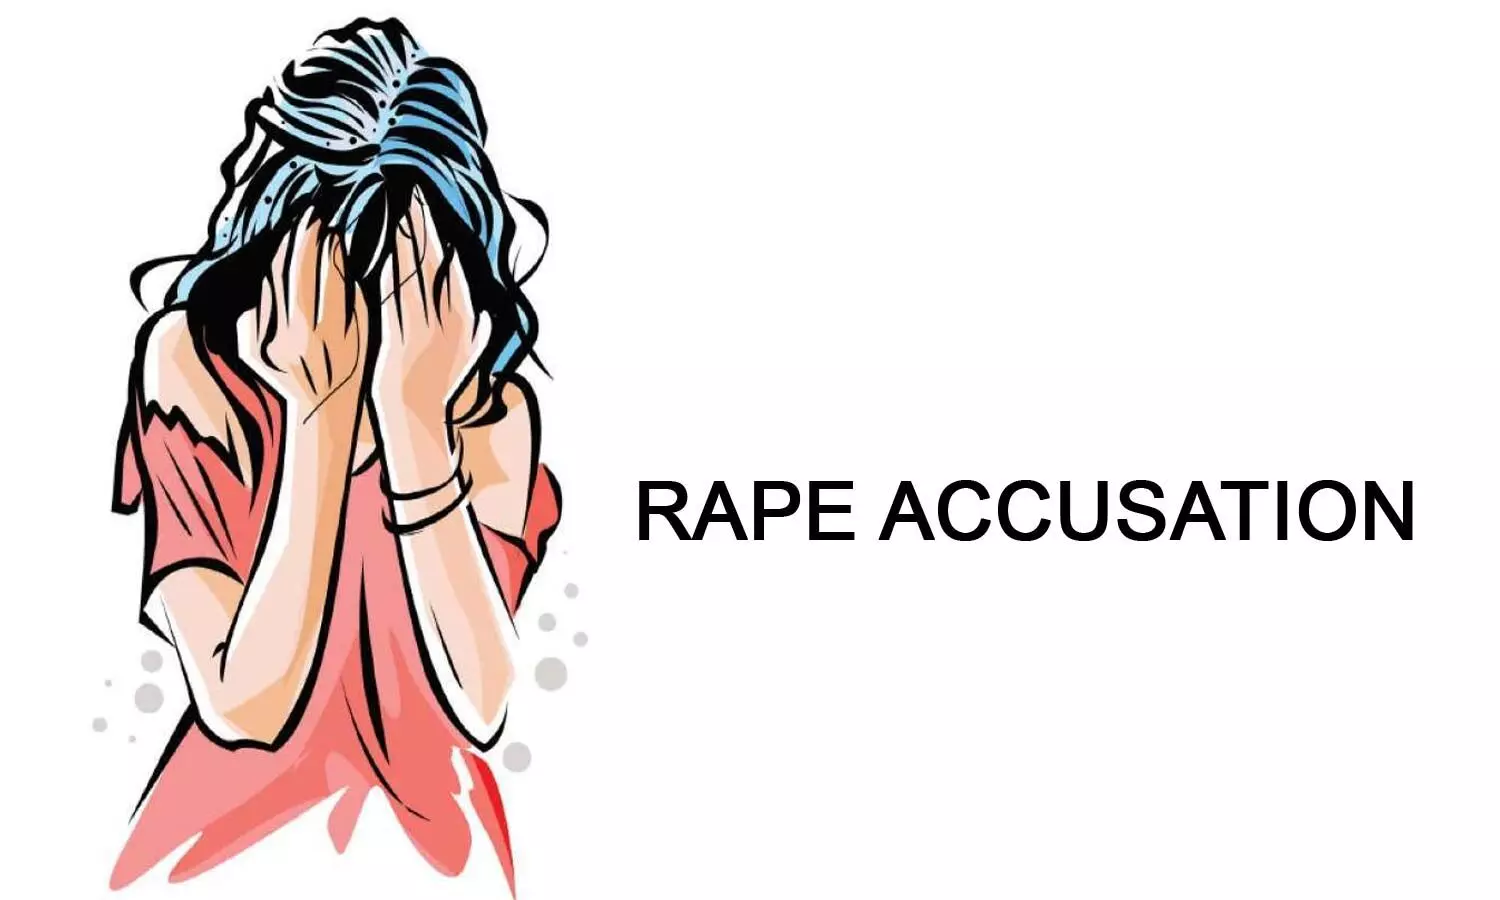 UP Doctor accused of rape attempt by colleague, now absconding